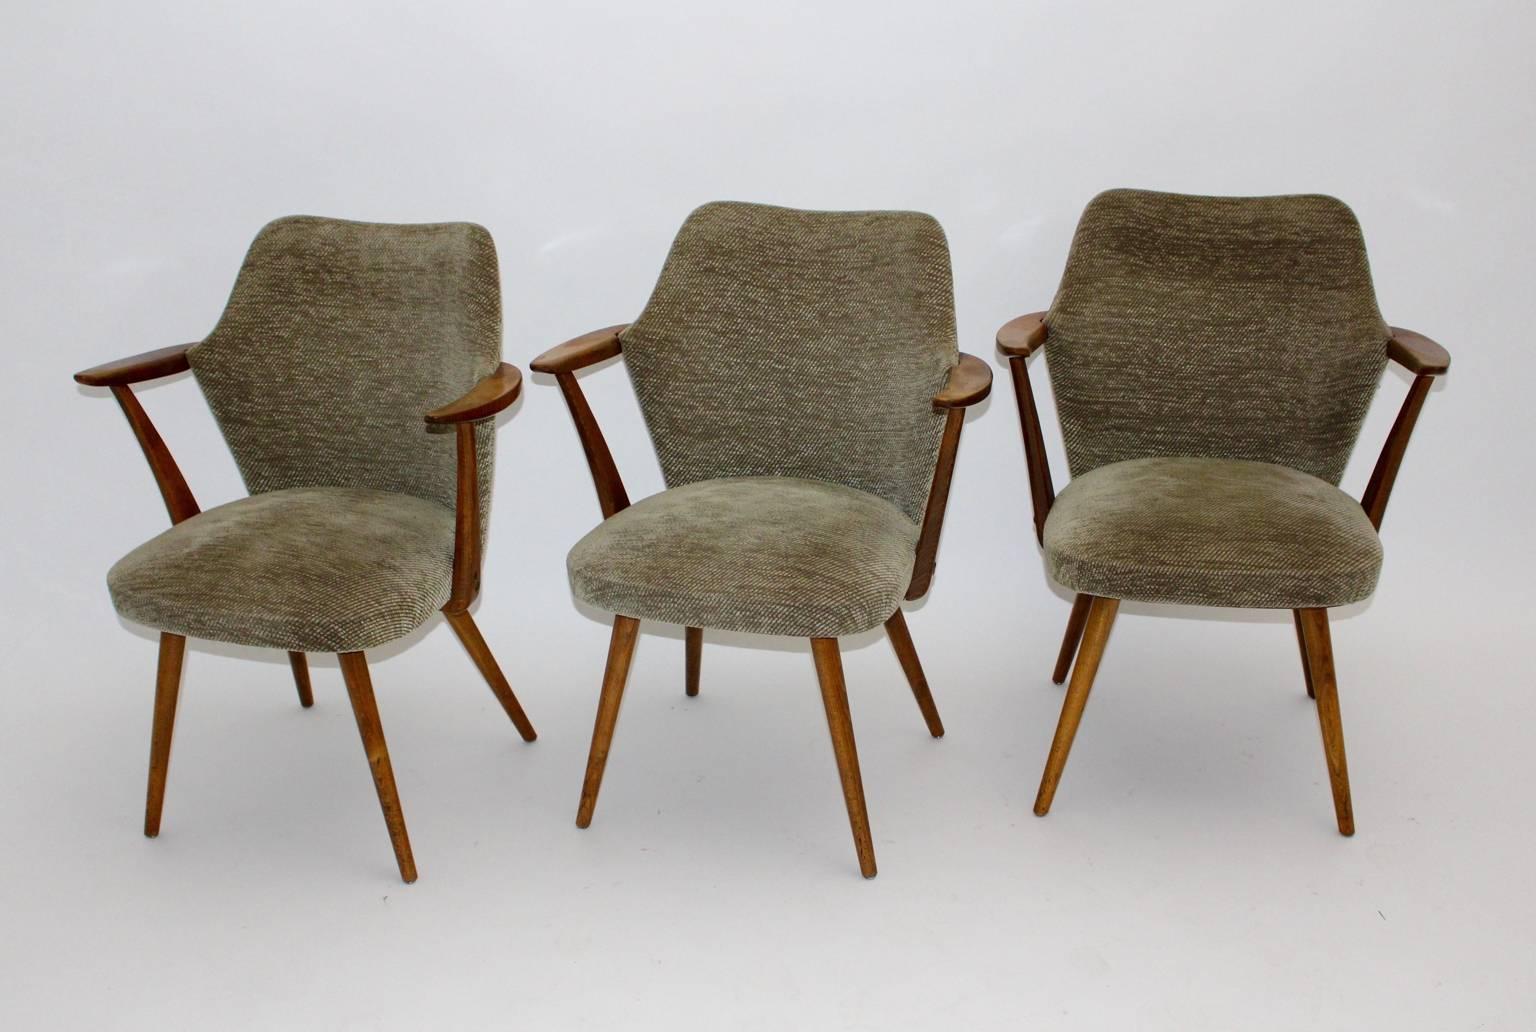 Mid century modern vintage armchairs or club chairs from beech designed by Oswald Haerdtl attributed Vienna 1950s.
The frame of the armchair is from beechwood, while the original upholstery is covered with an original woolen light-brown fabric. 
The